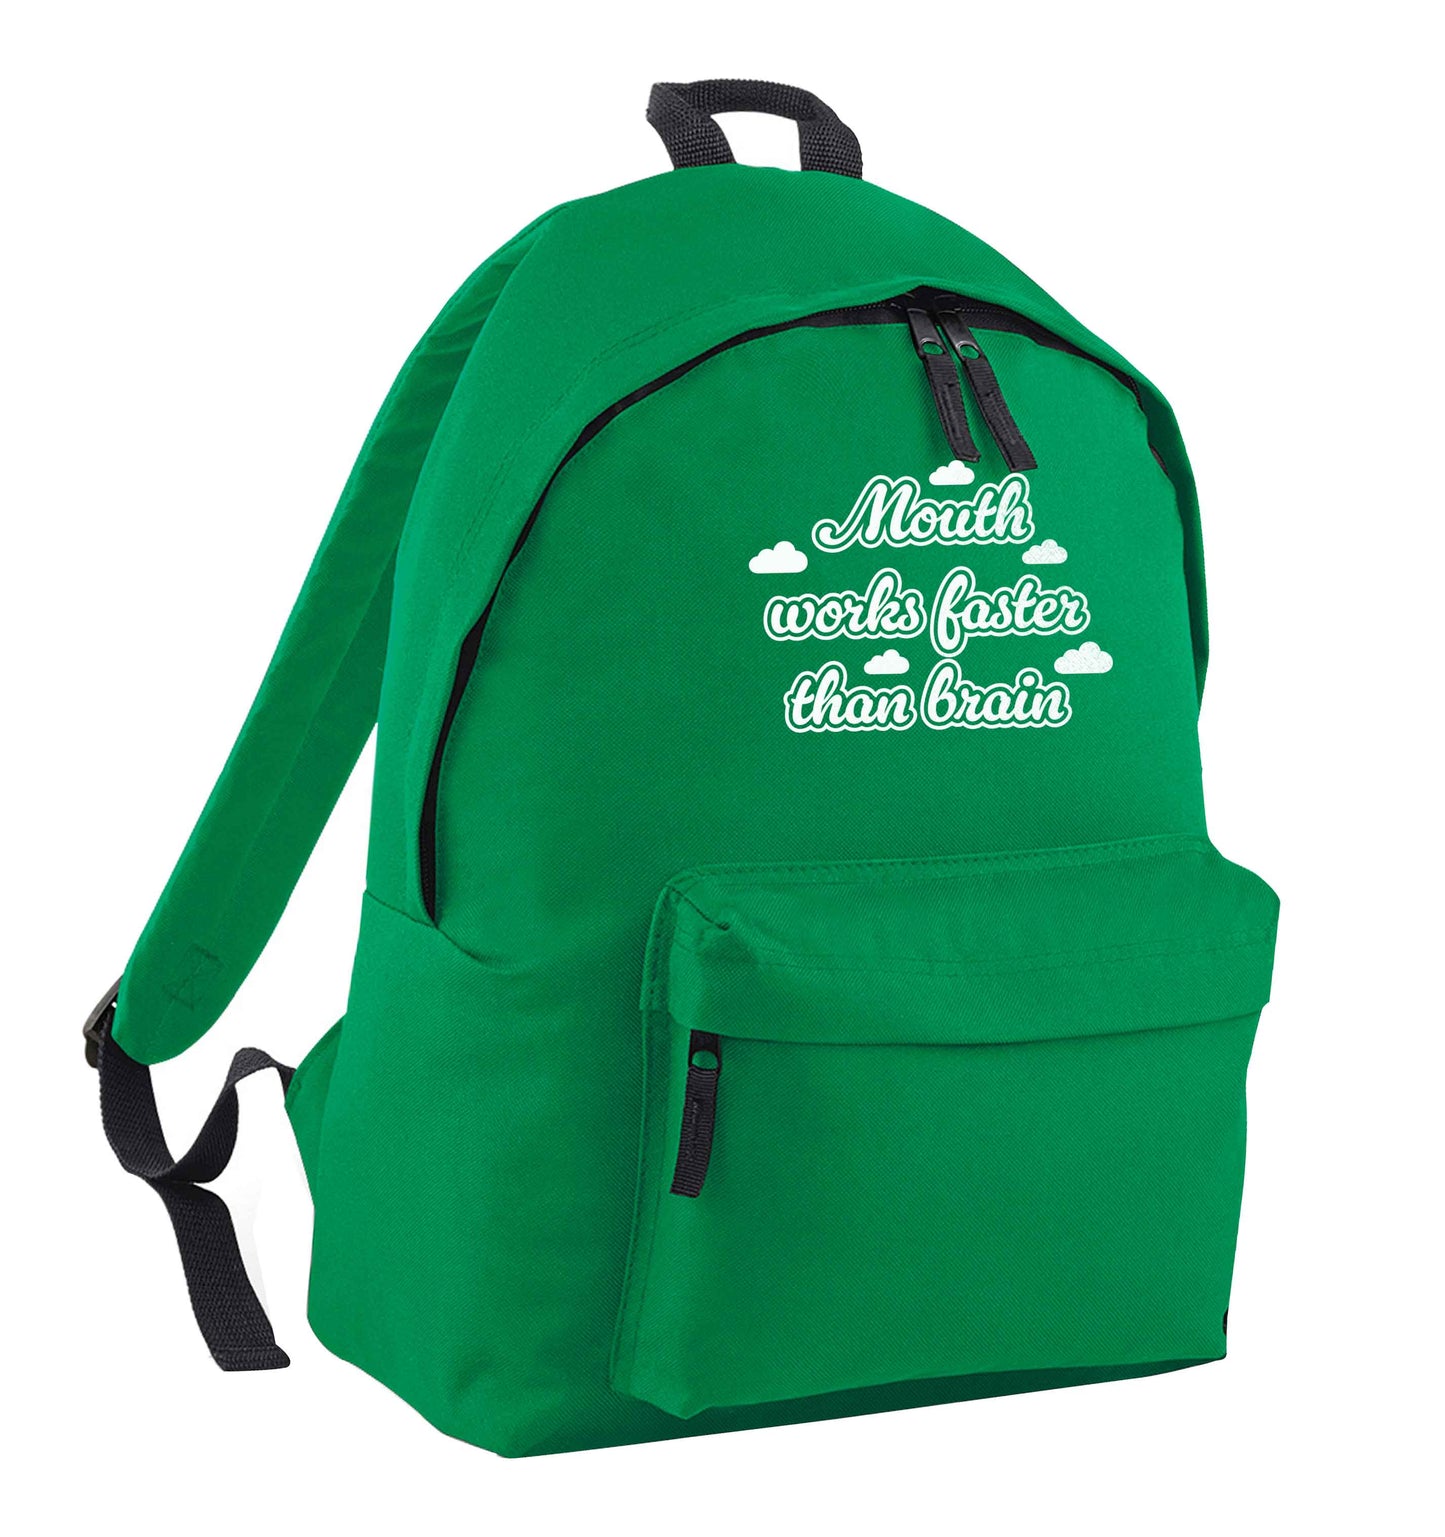 Mouth works faster than brain green adults backpack